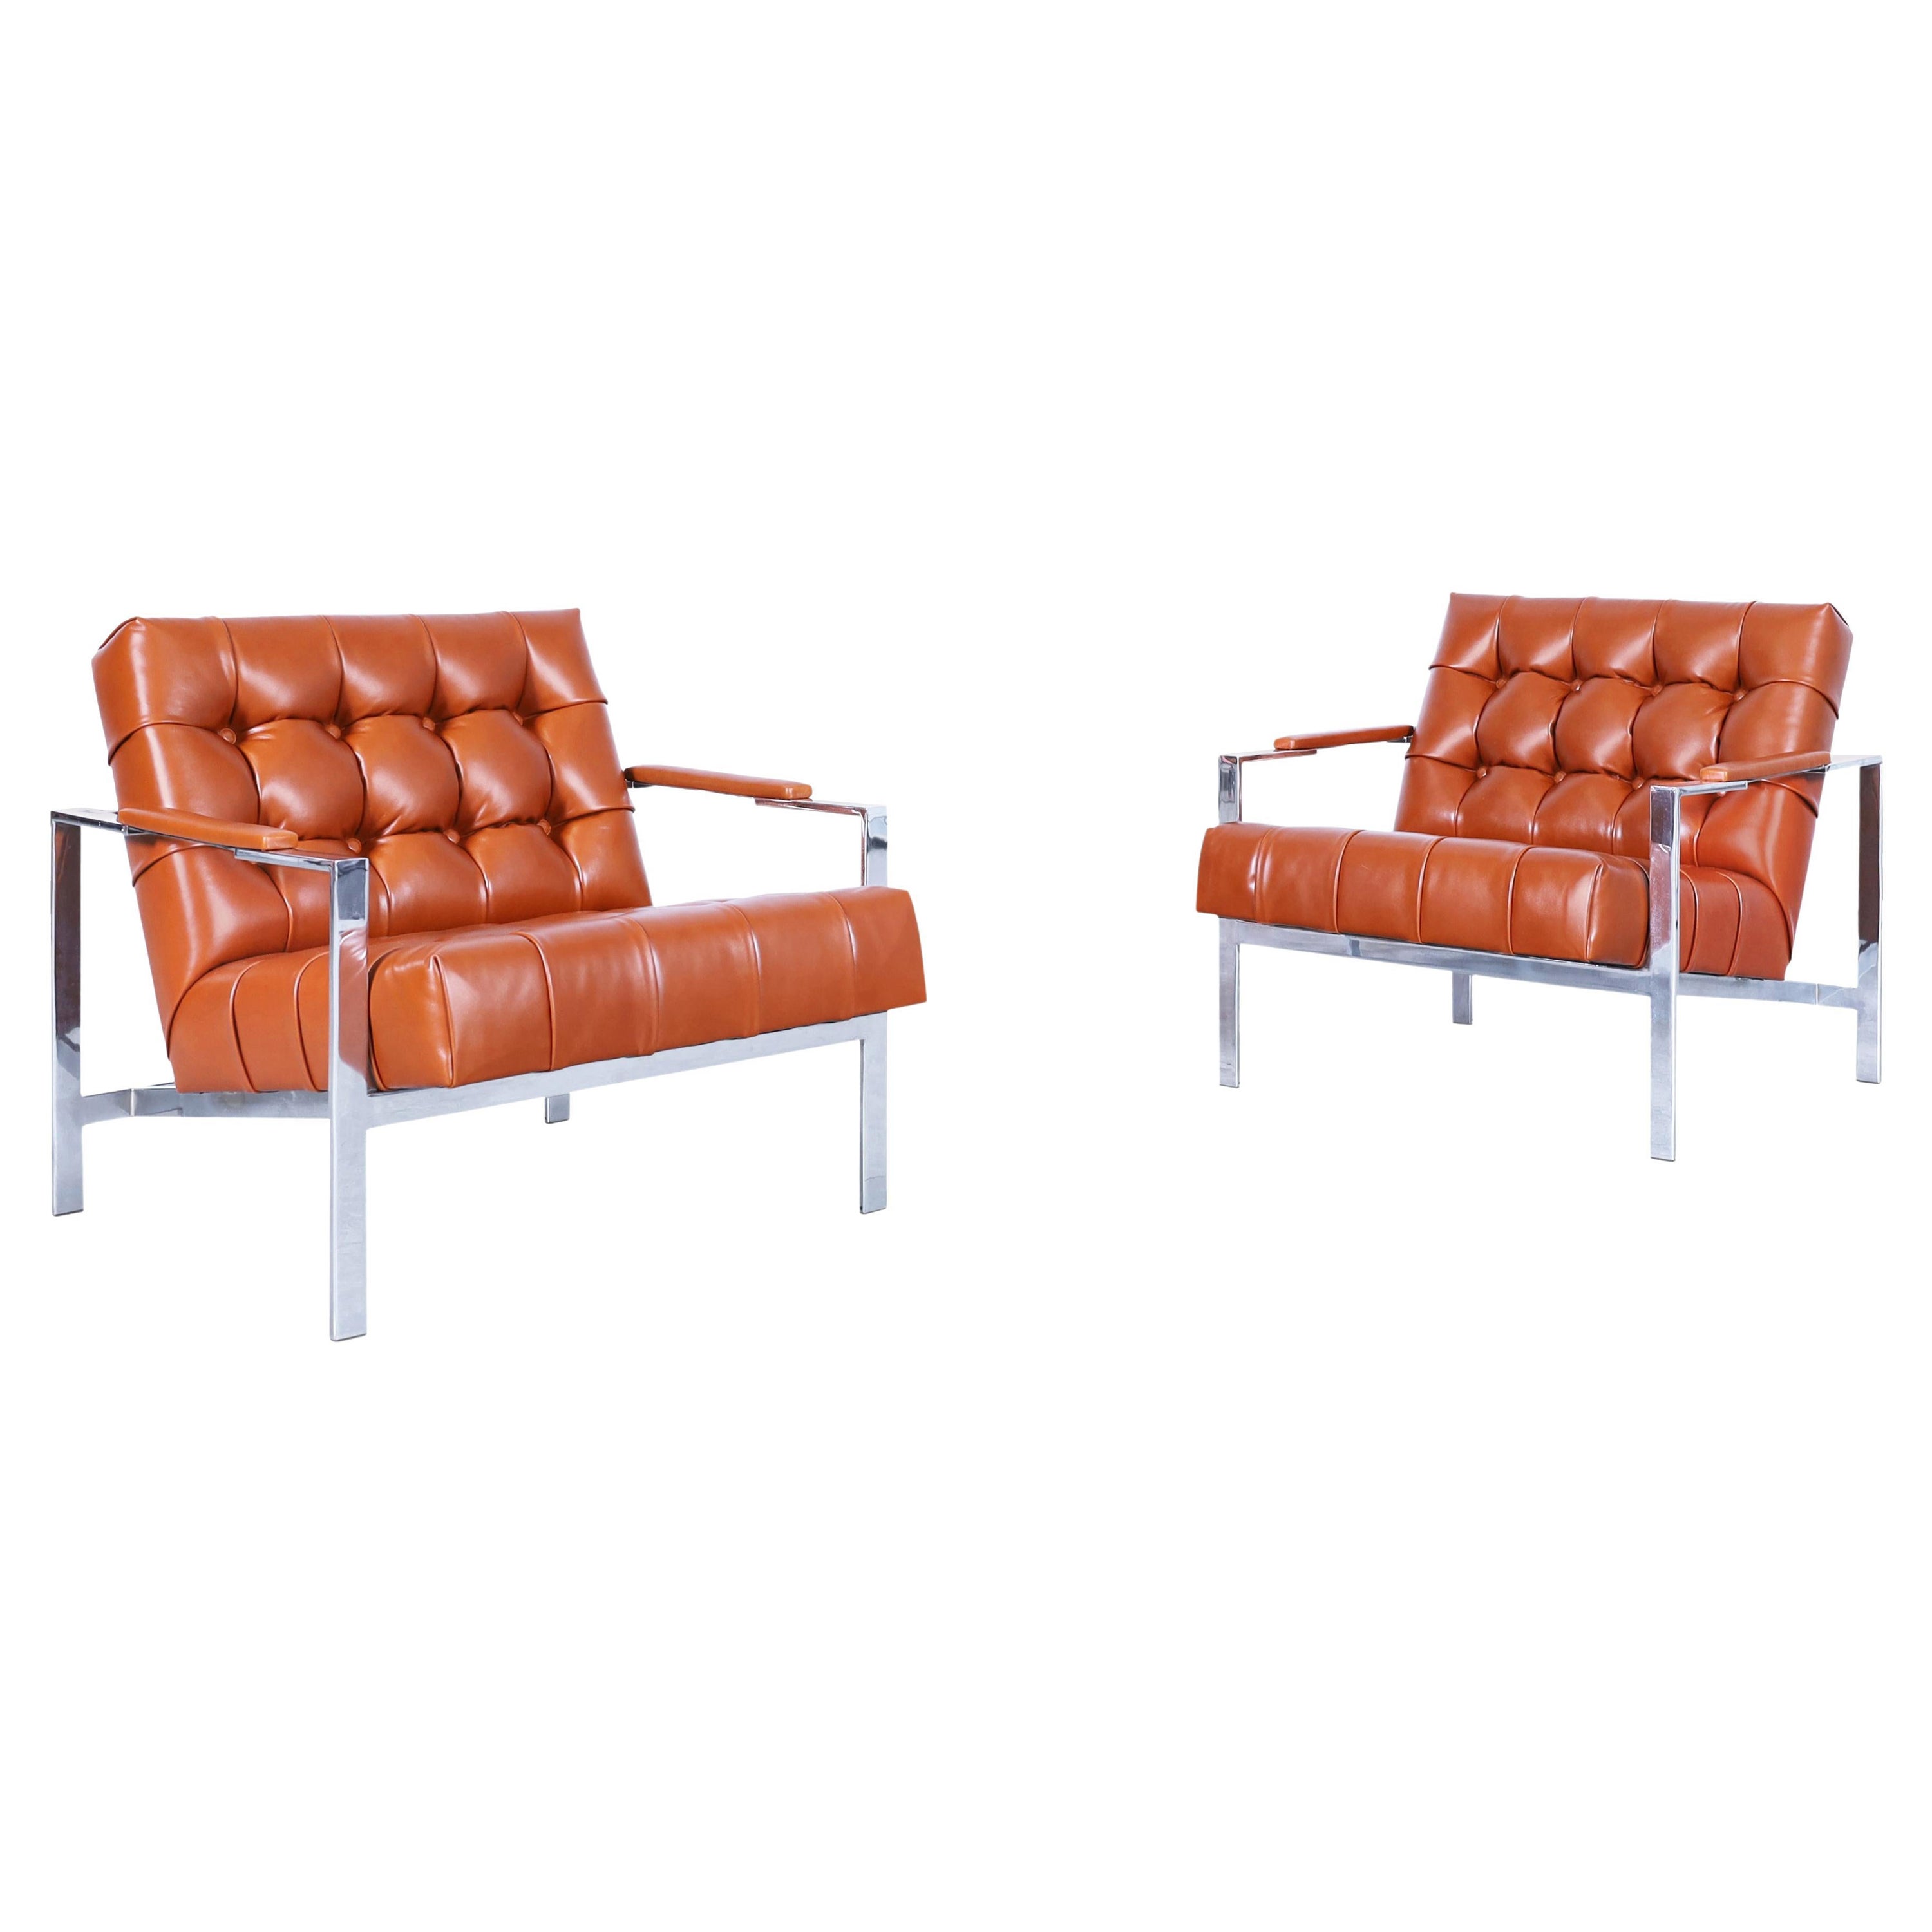 Vintage Leather and Chrome Biscuit Tufted Lounge Chairs by Milo Baughman For Sale